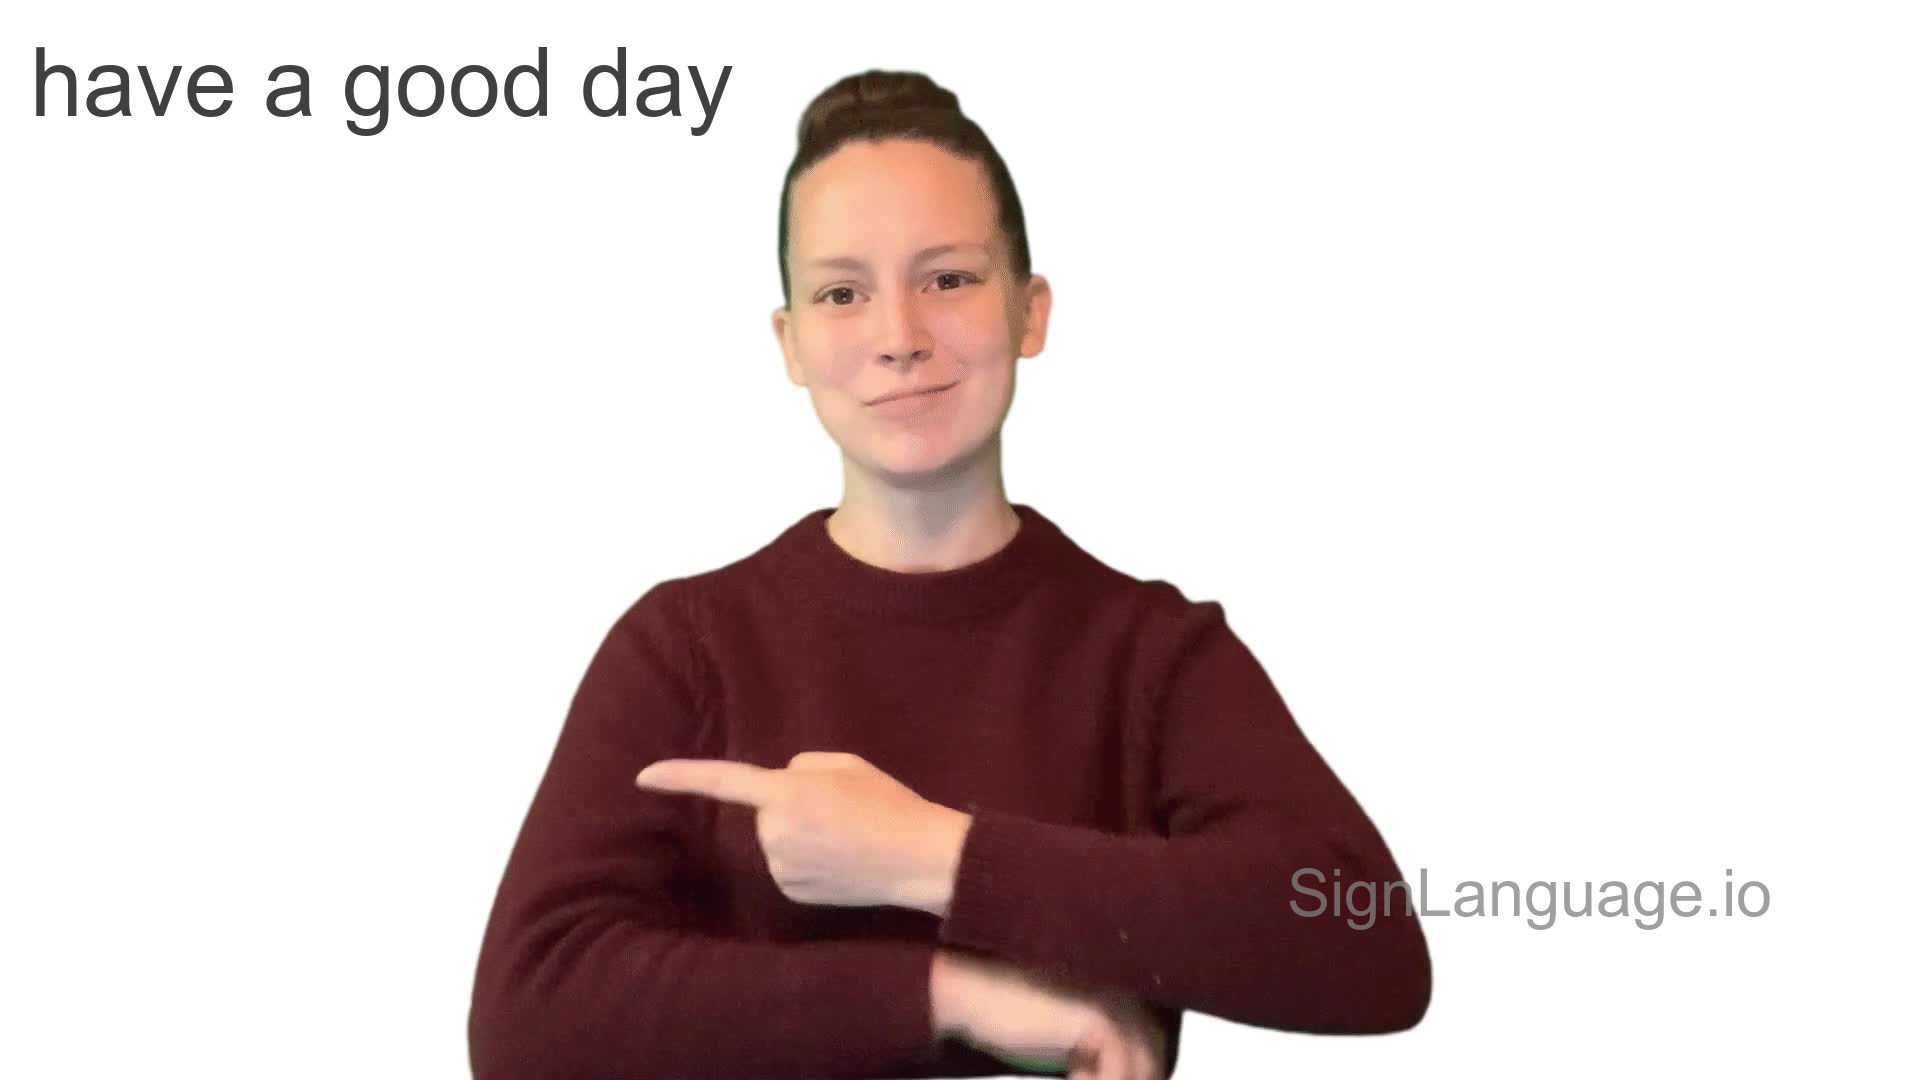 Have a good day in ASL